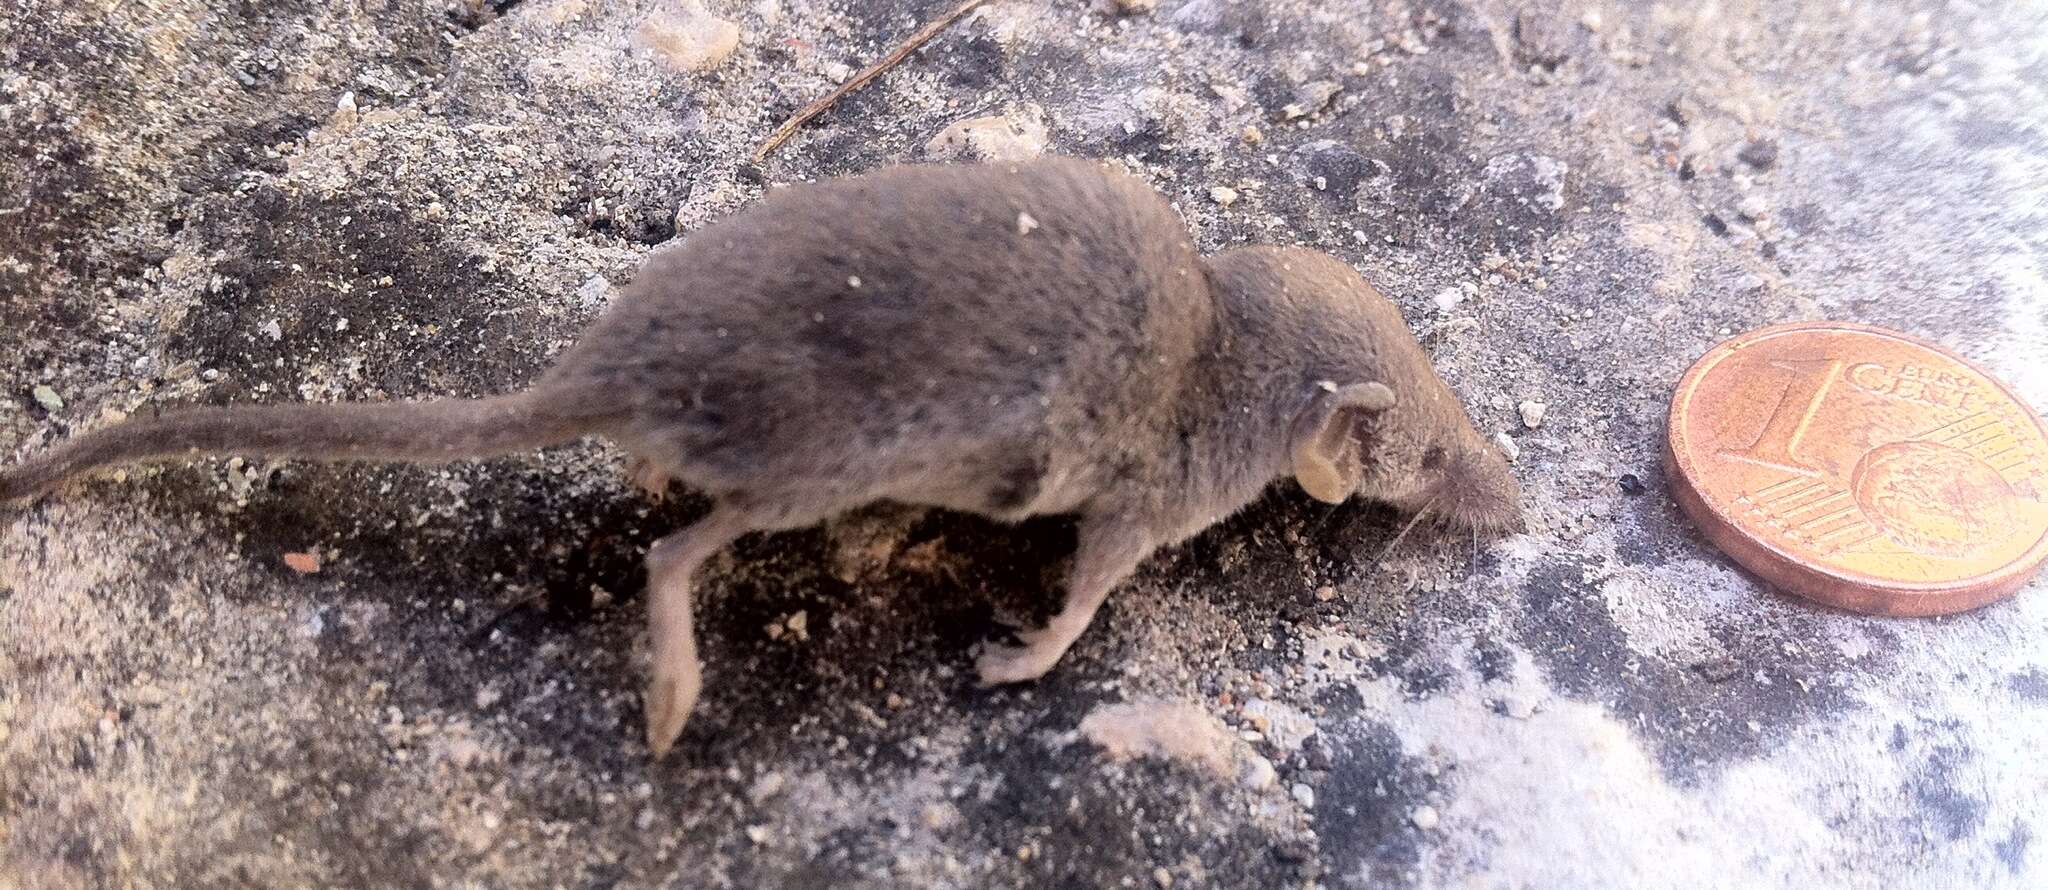 Image of Etruscan Shrew